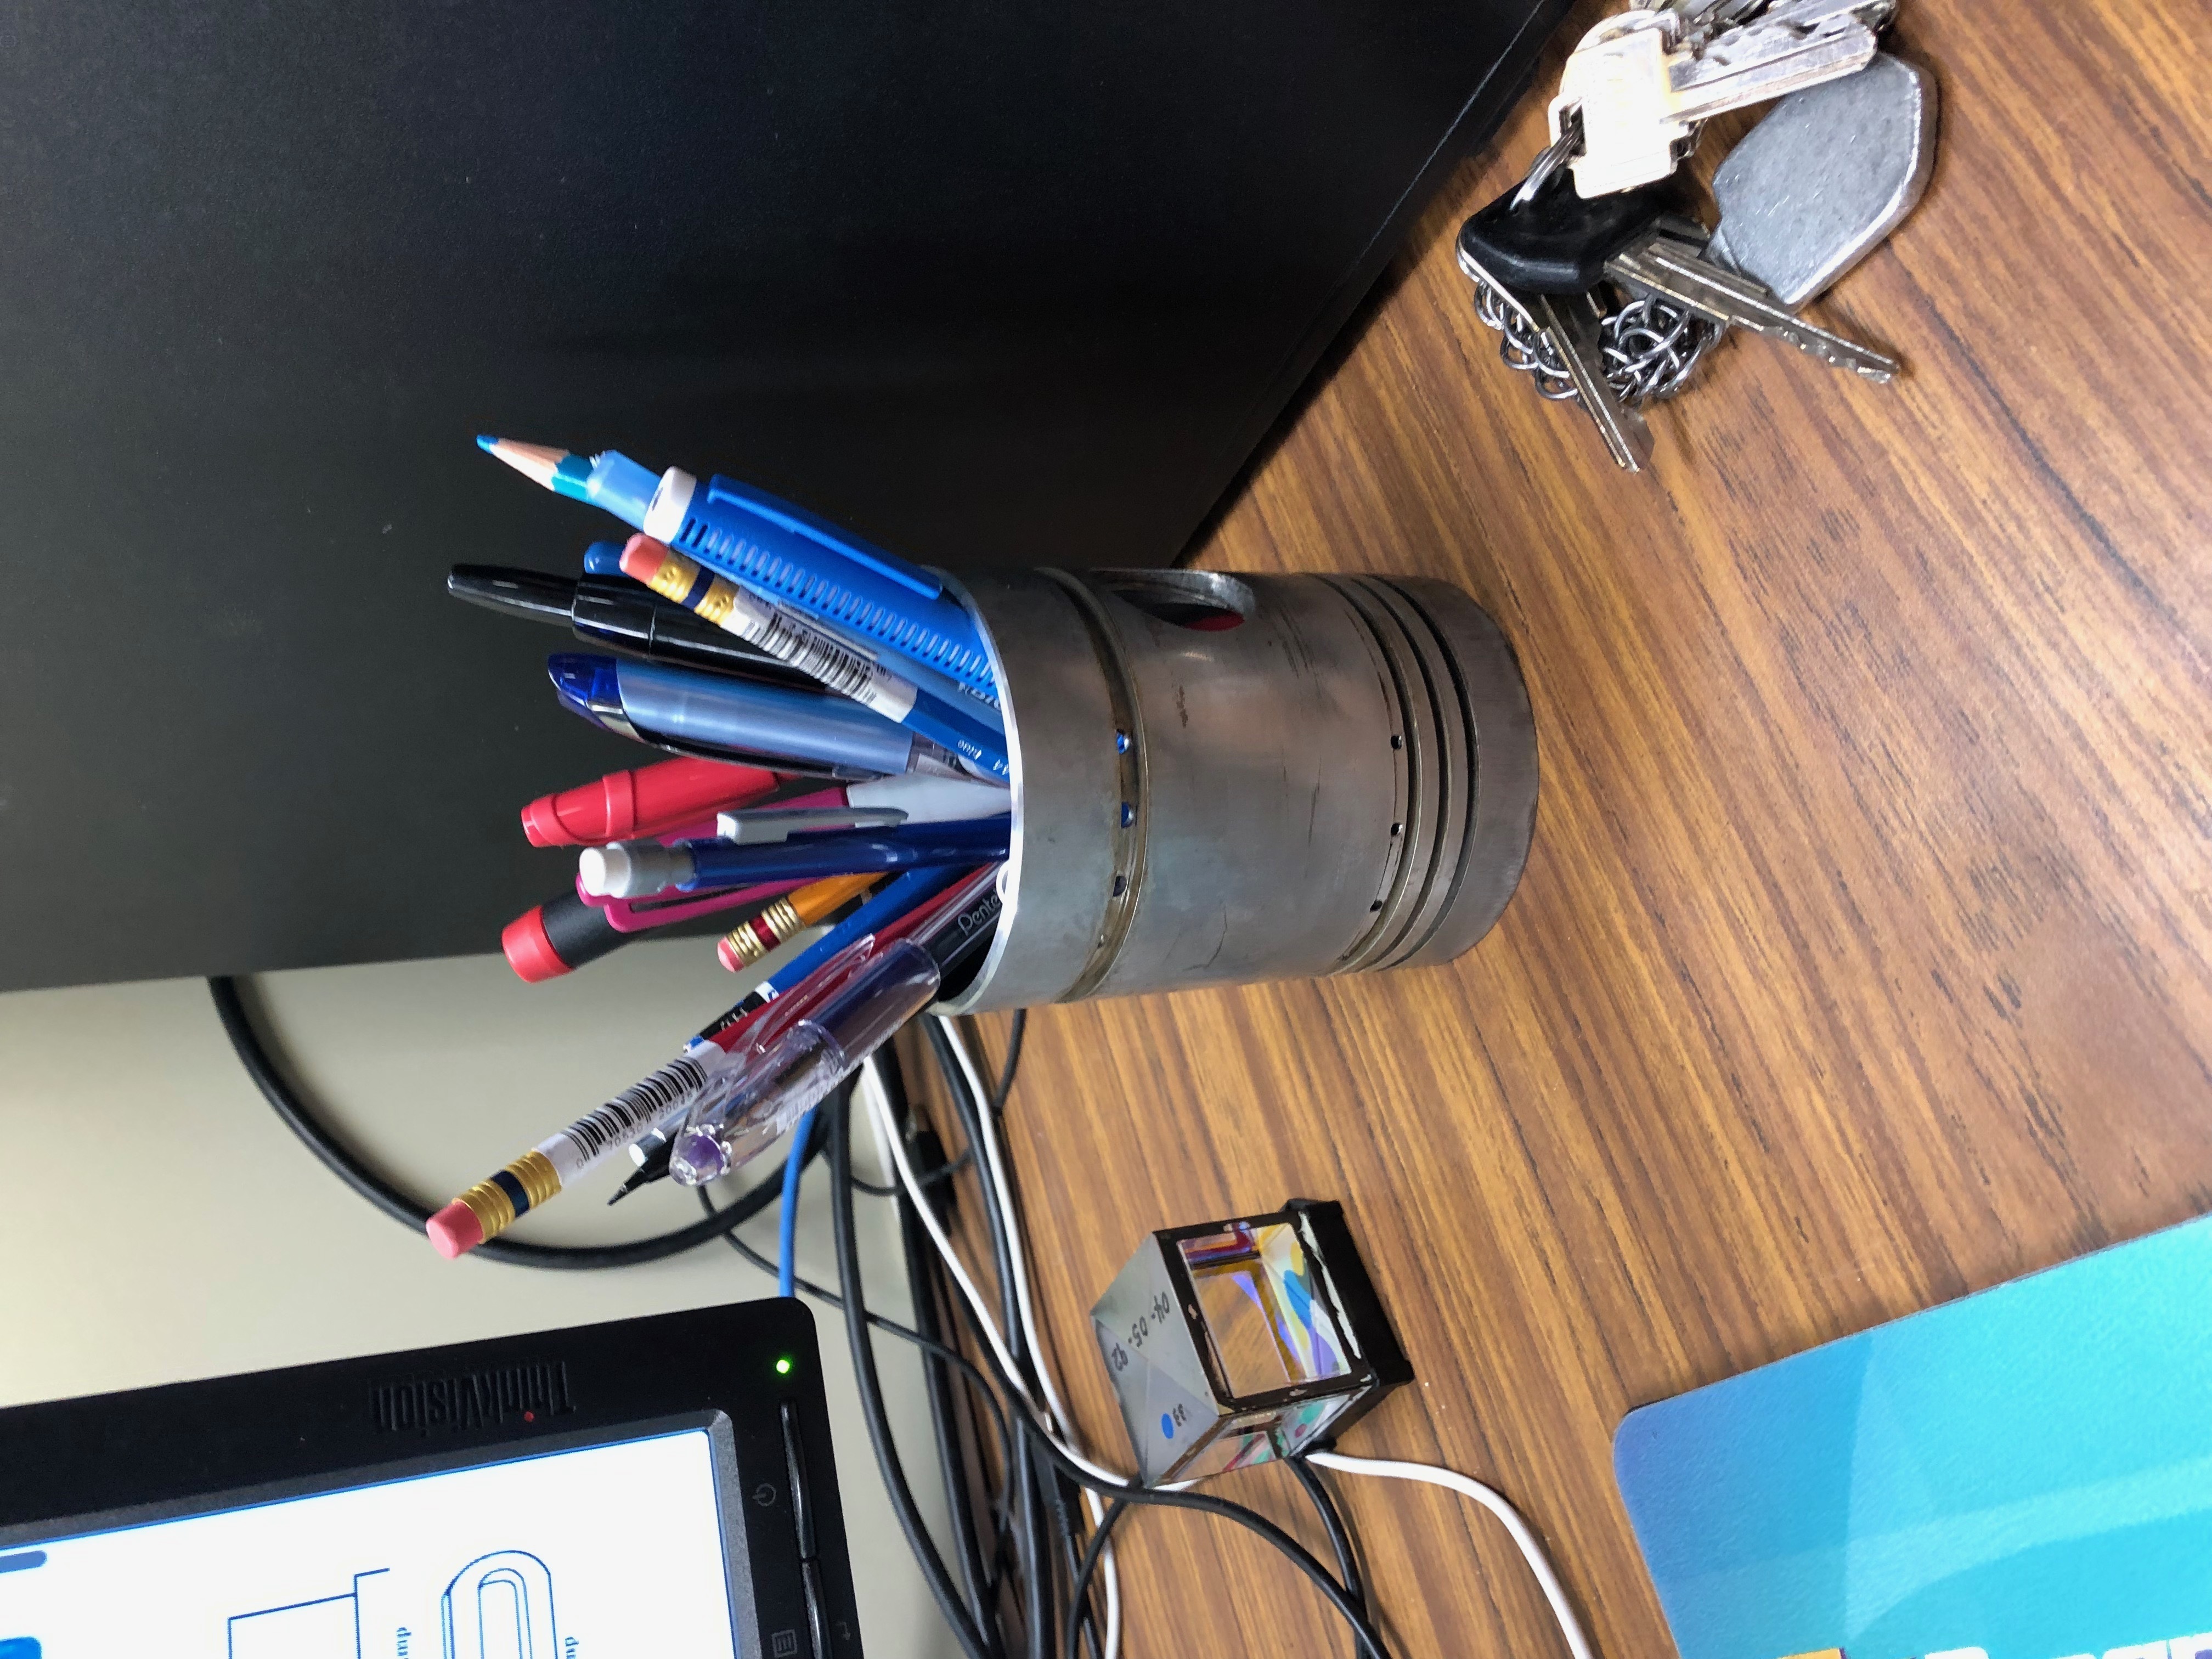 Completed pen holder in use